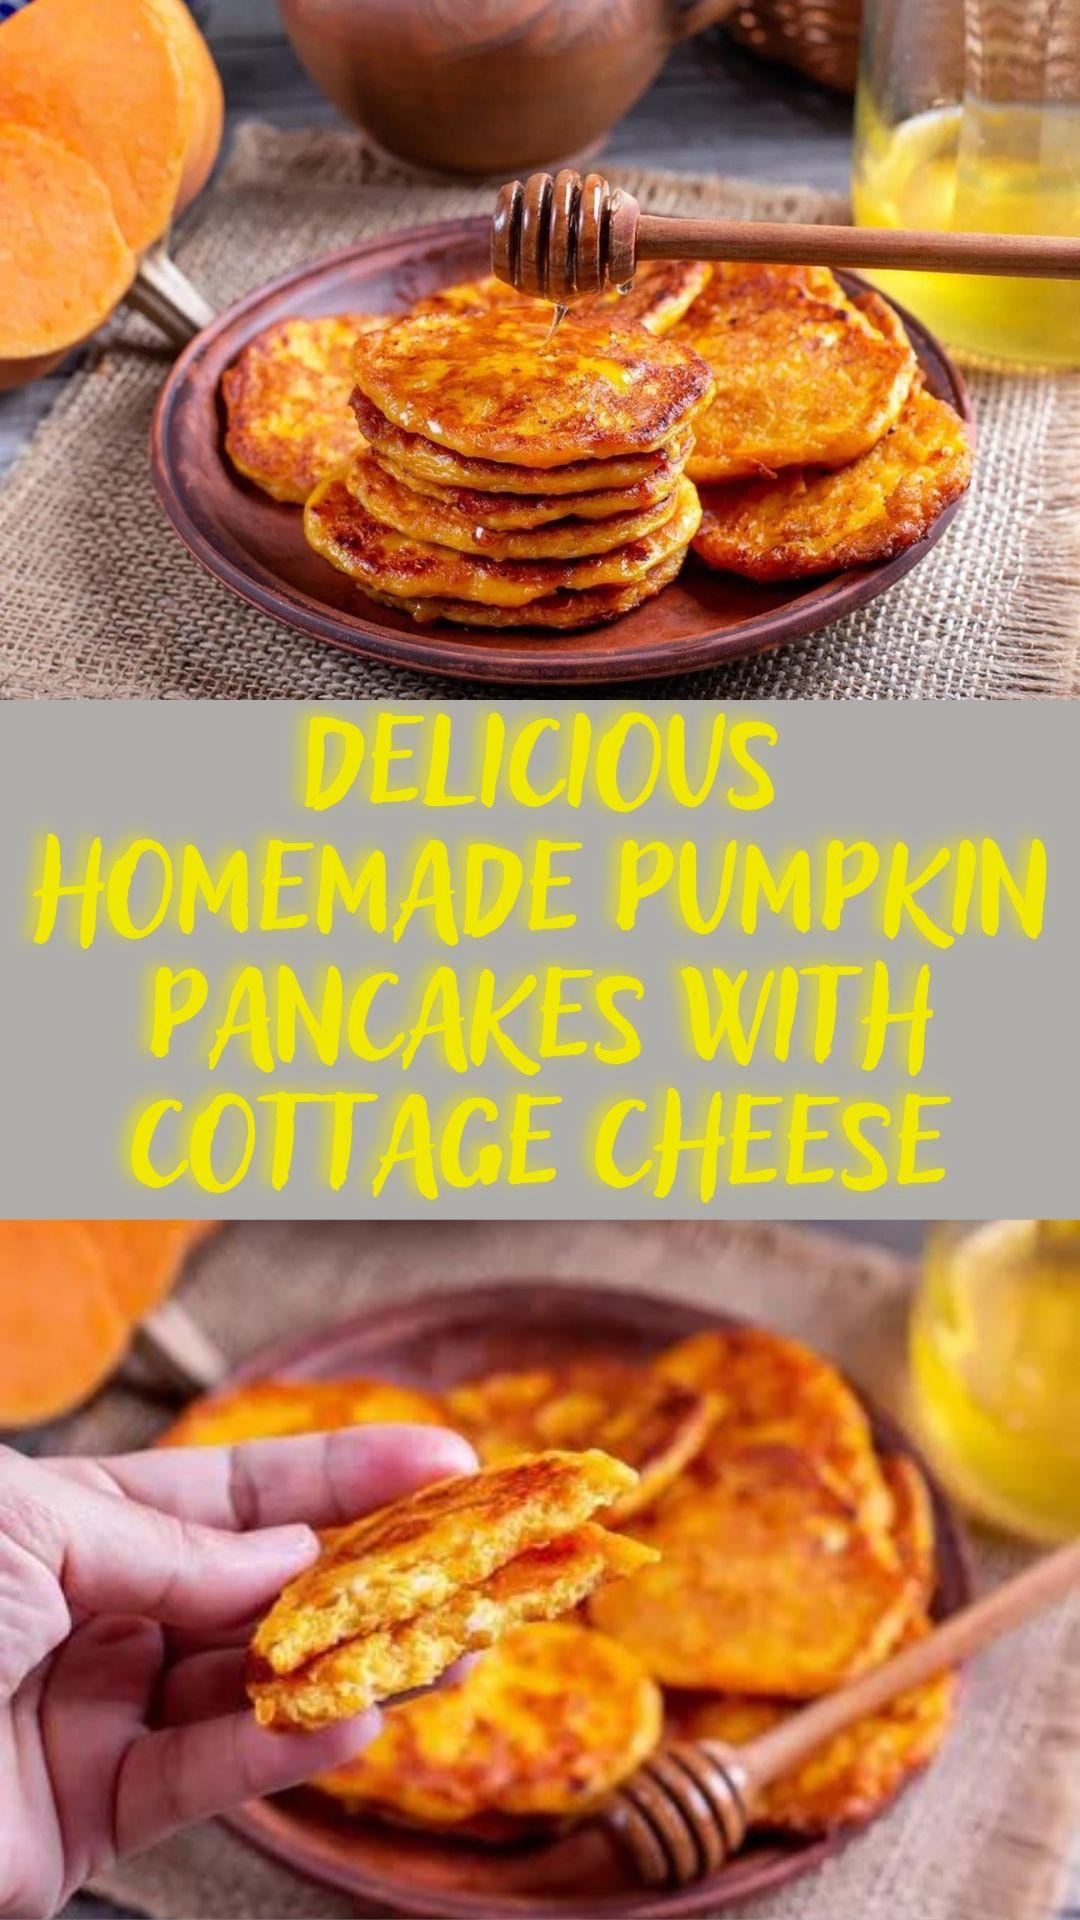 Delicious homemade pumpkin pancakes with cottage cheese